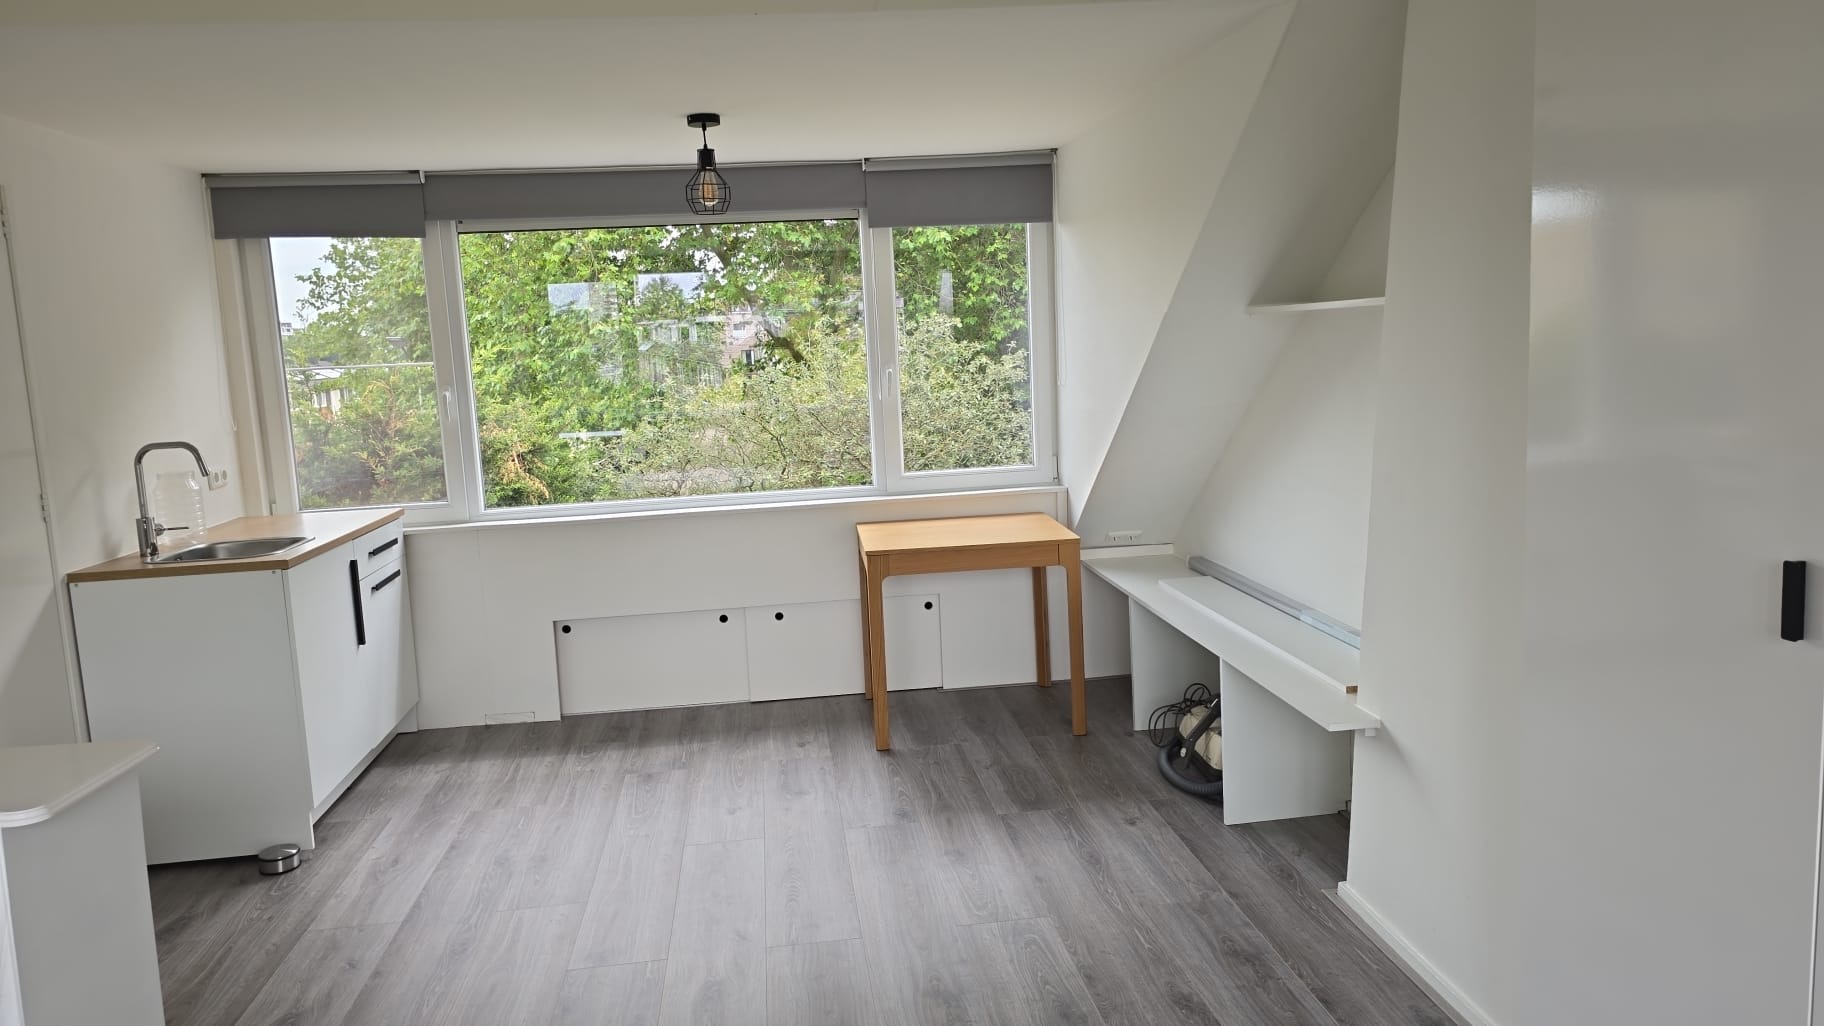  For Rent: Cozy Studio in Haarlem - Ideal for a Single Lady!